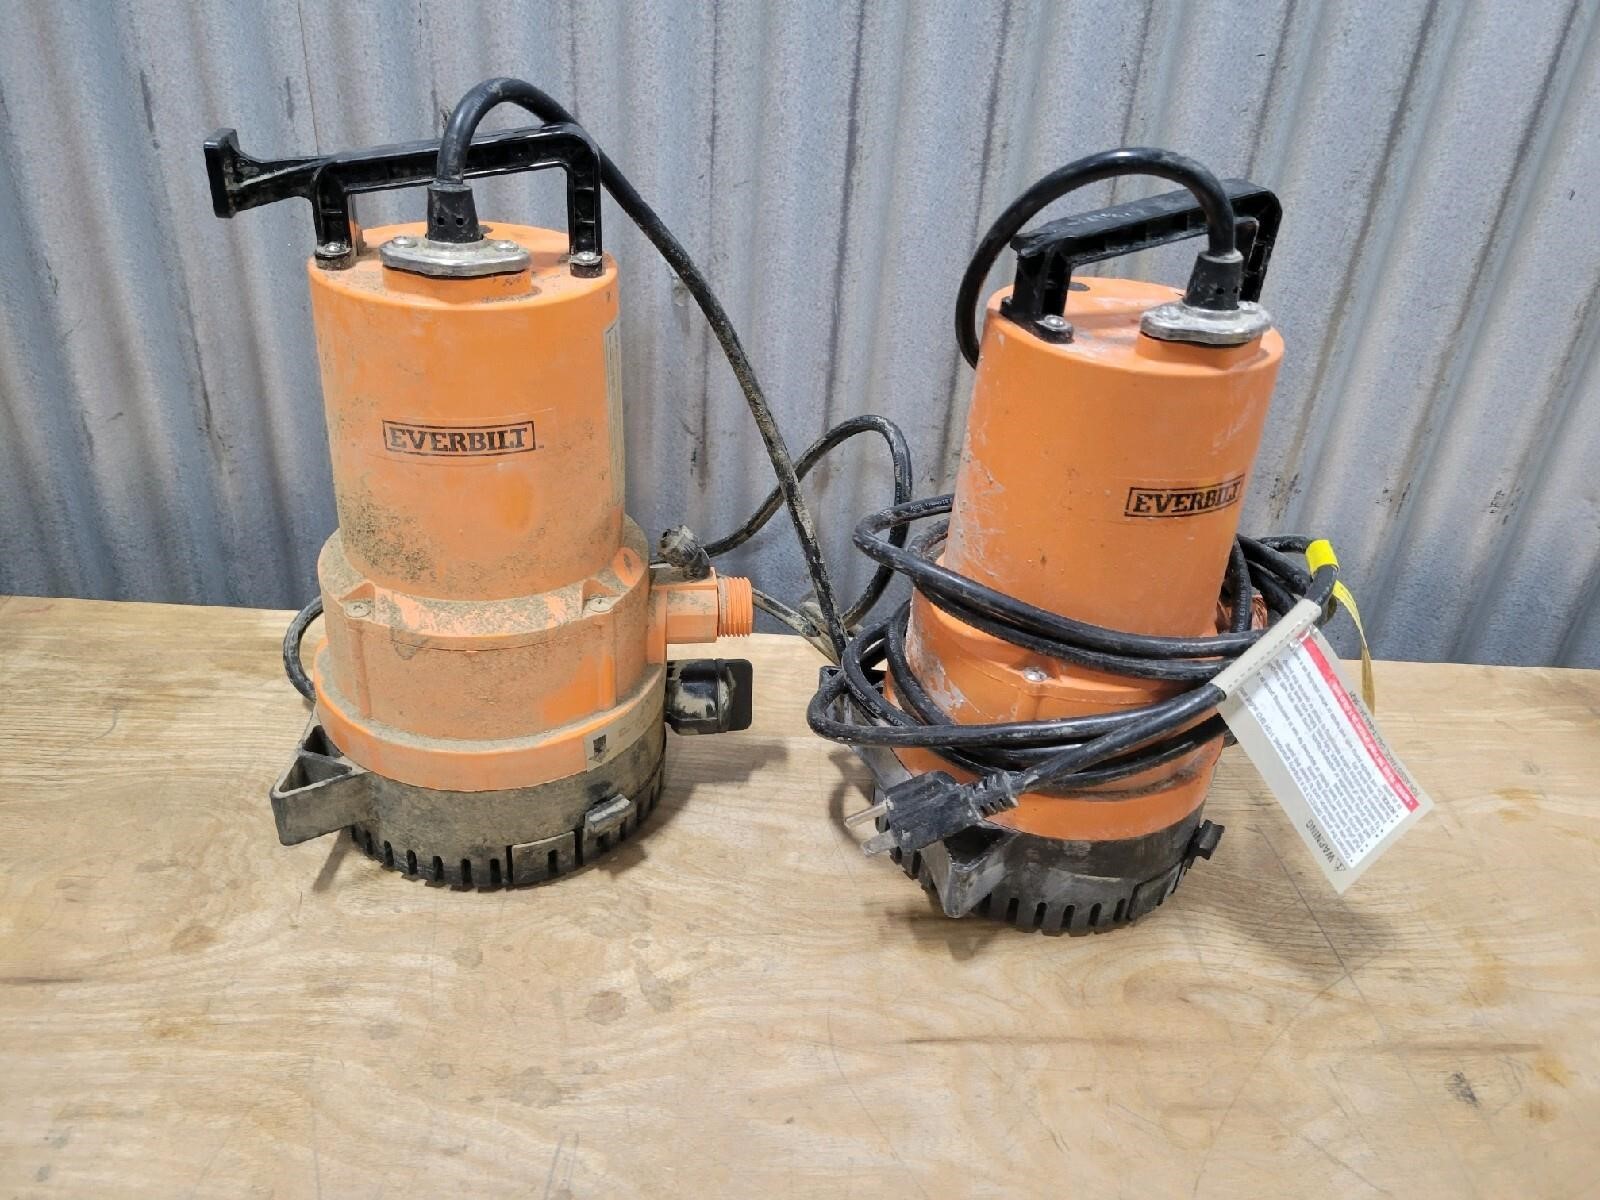 Lot 2 Everbilt 1/4 HP 2-in-1 Submersible